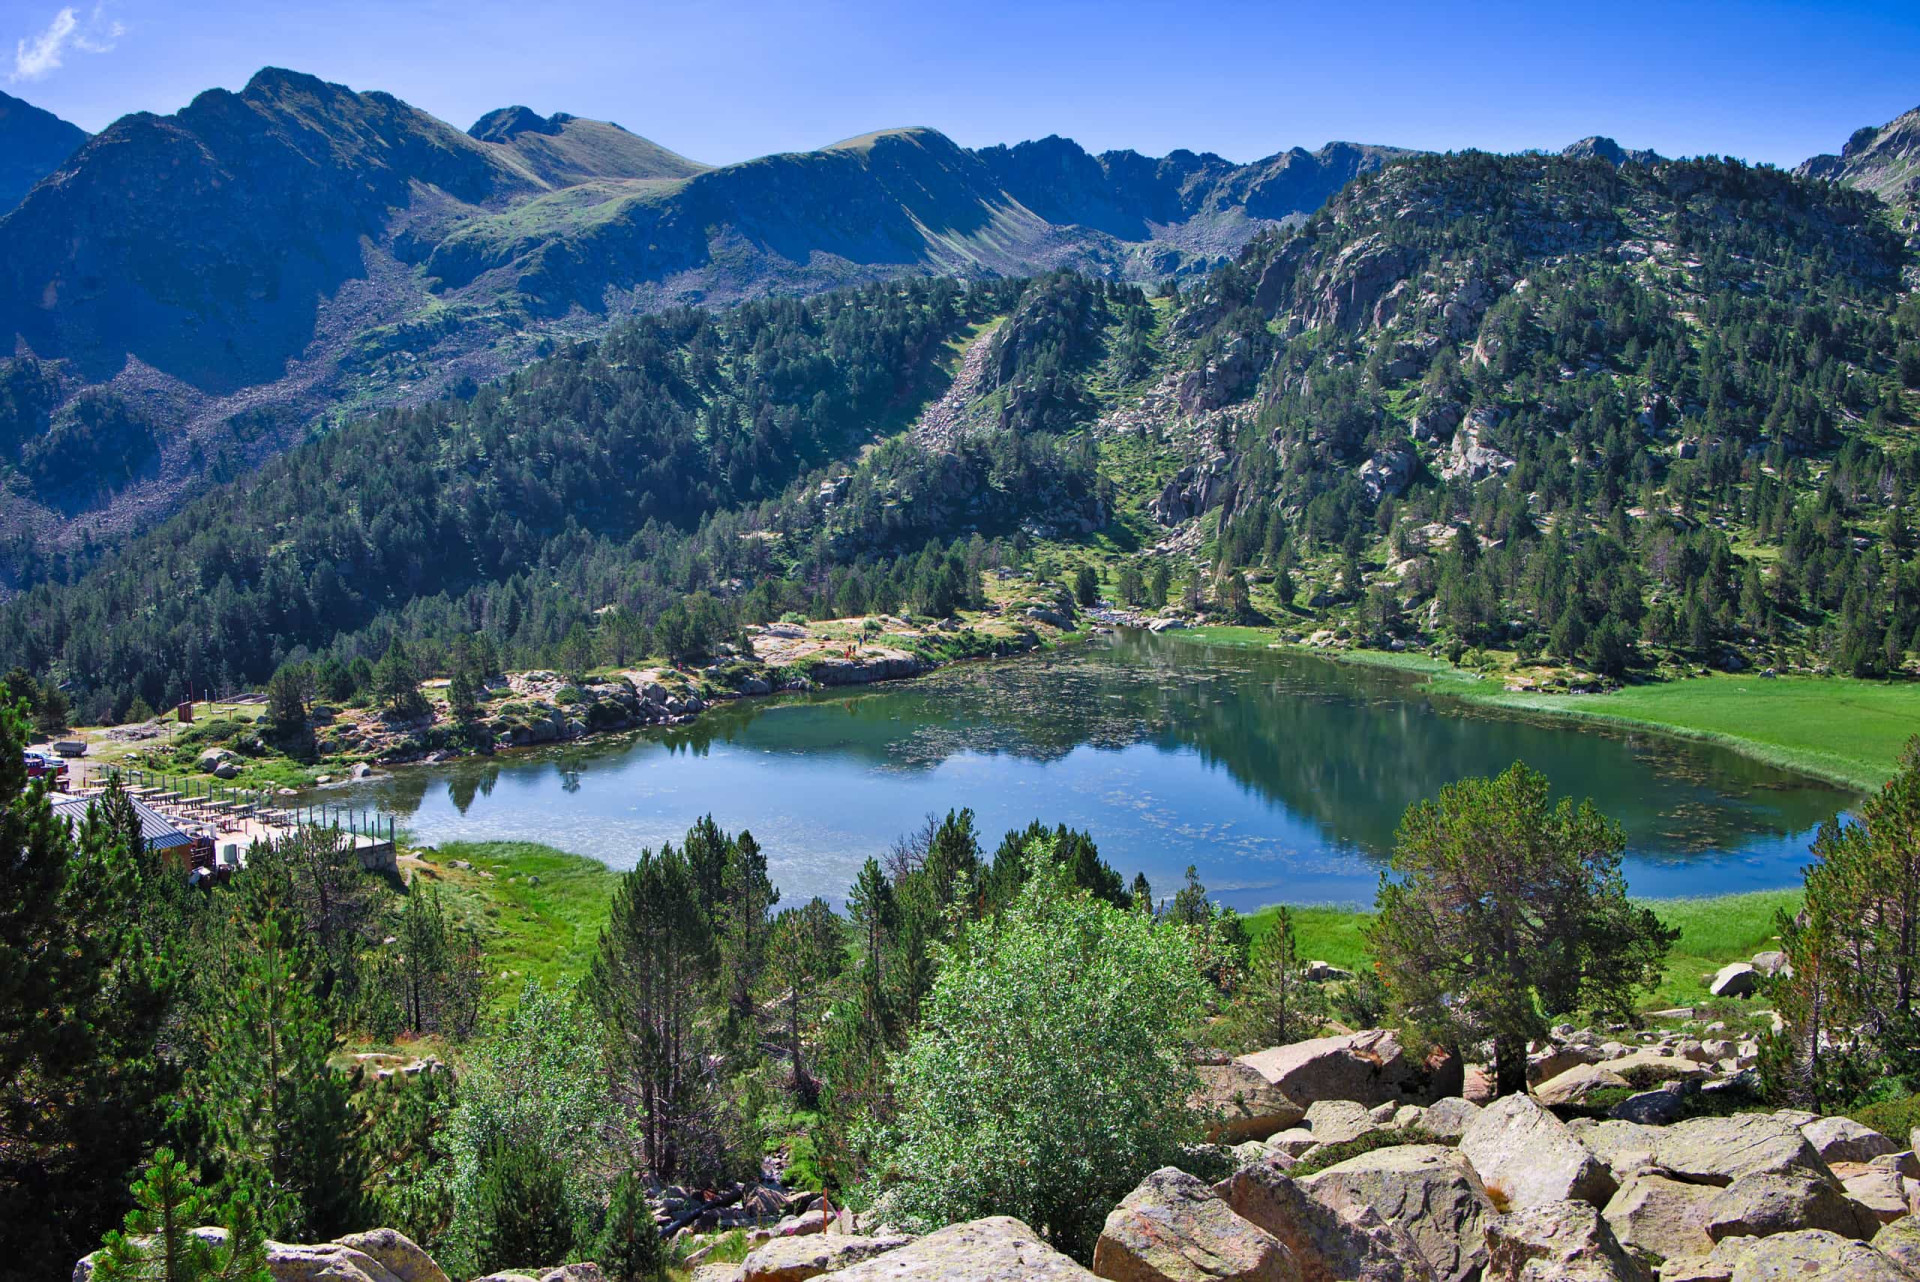 <p>The largest of Andorra's numerous national parks, Madriu-Perafita-Claror is also a UNESCO World Heritage Site. The park is home to roe deer, eagles, and wild boars.</p><p><a href="https://www.msn.com/en-za/community/channel/vid-7xx8mnucu55yw63we9va2gwr7uihbxwc68fxqp25x6tg4ftibpra?cvid=94631541bc0f4f89bfd59158d696ad7e">Follow us and access great exclusive content every day</a></p>